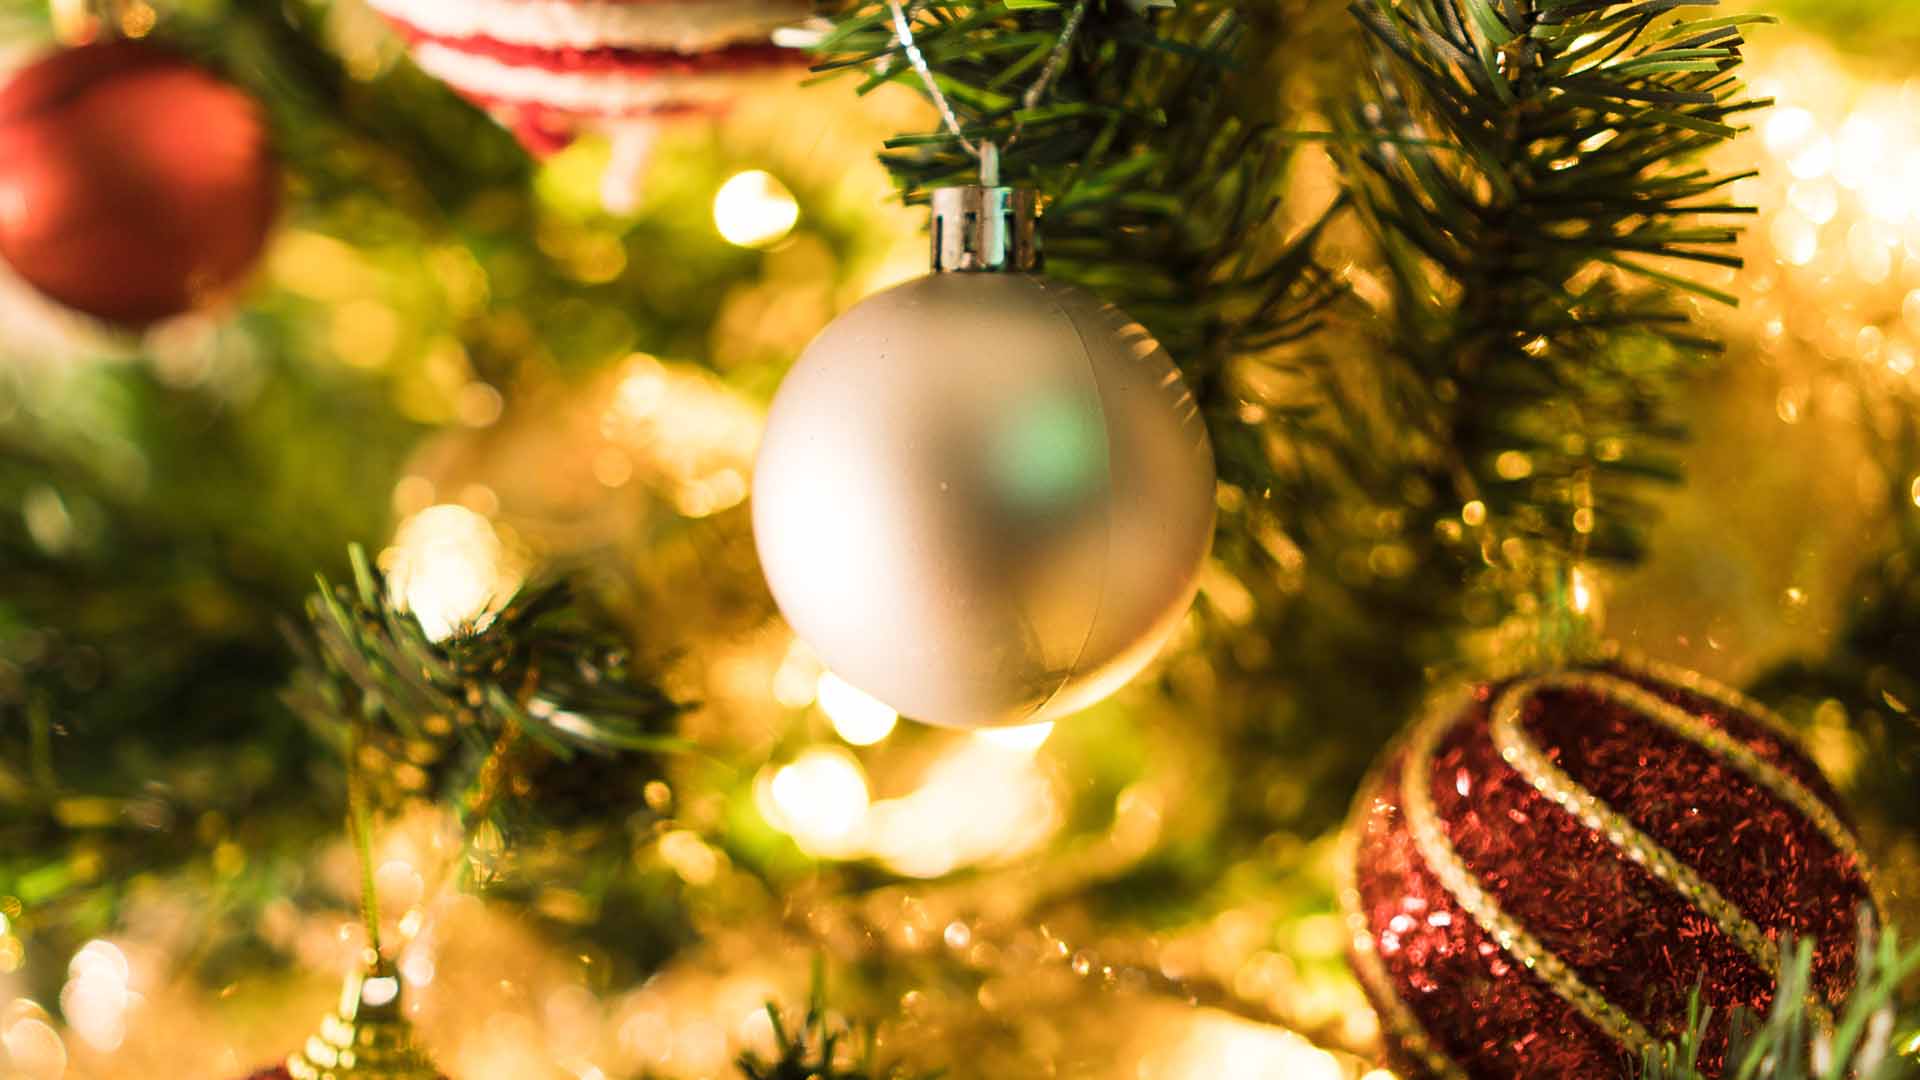 Close up of Christmas ornaments on a Christmas tree